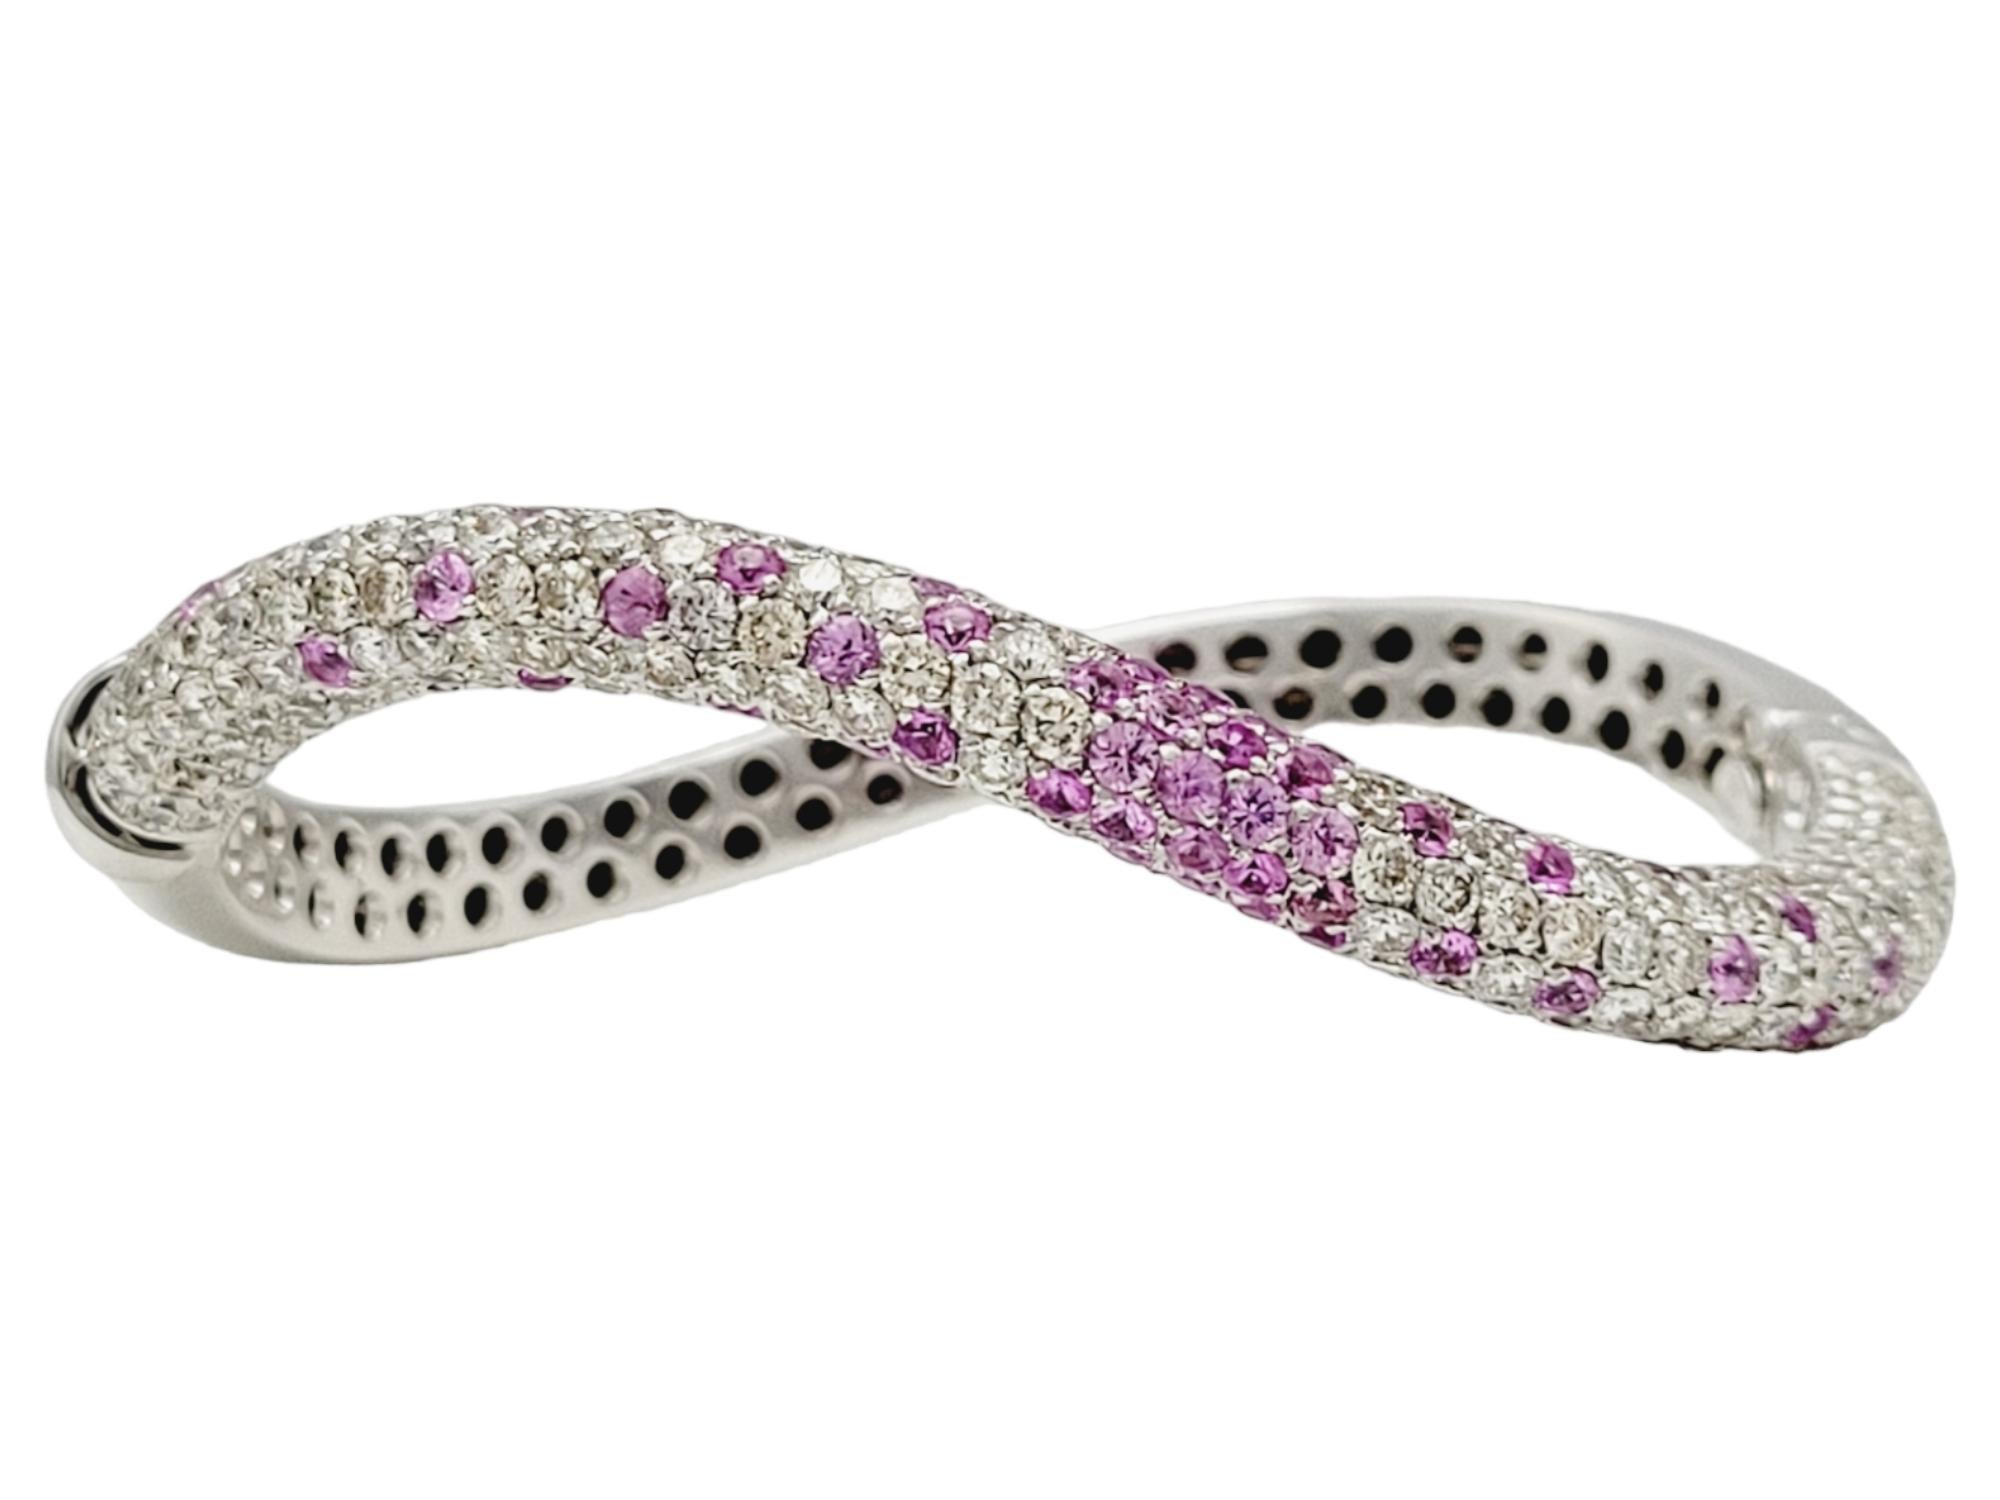 This is a gorgeous, ultra feminine diamond and pink sapphire bangle bracelet. Contemporary in style, the sleek curved design is enhanced by the colorful sprinkling of pink sapphires against the icy white diamonds. An absolutely lovely piece!

This